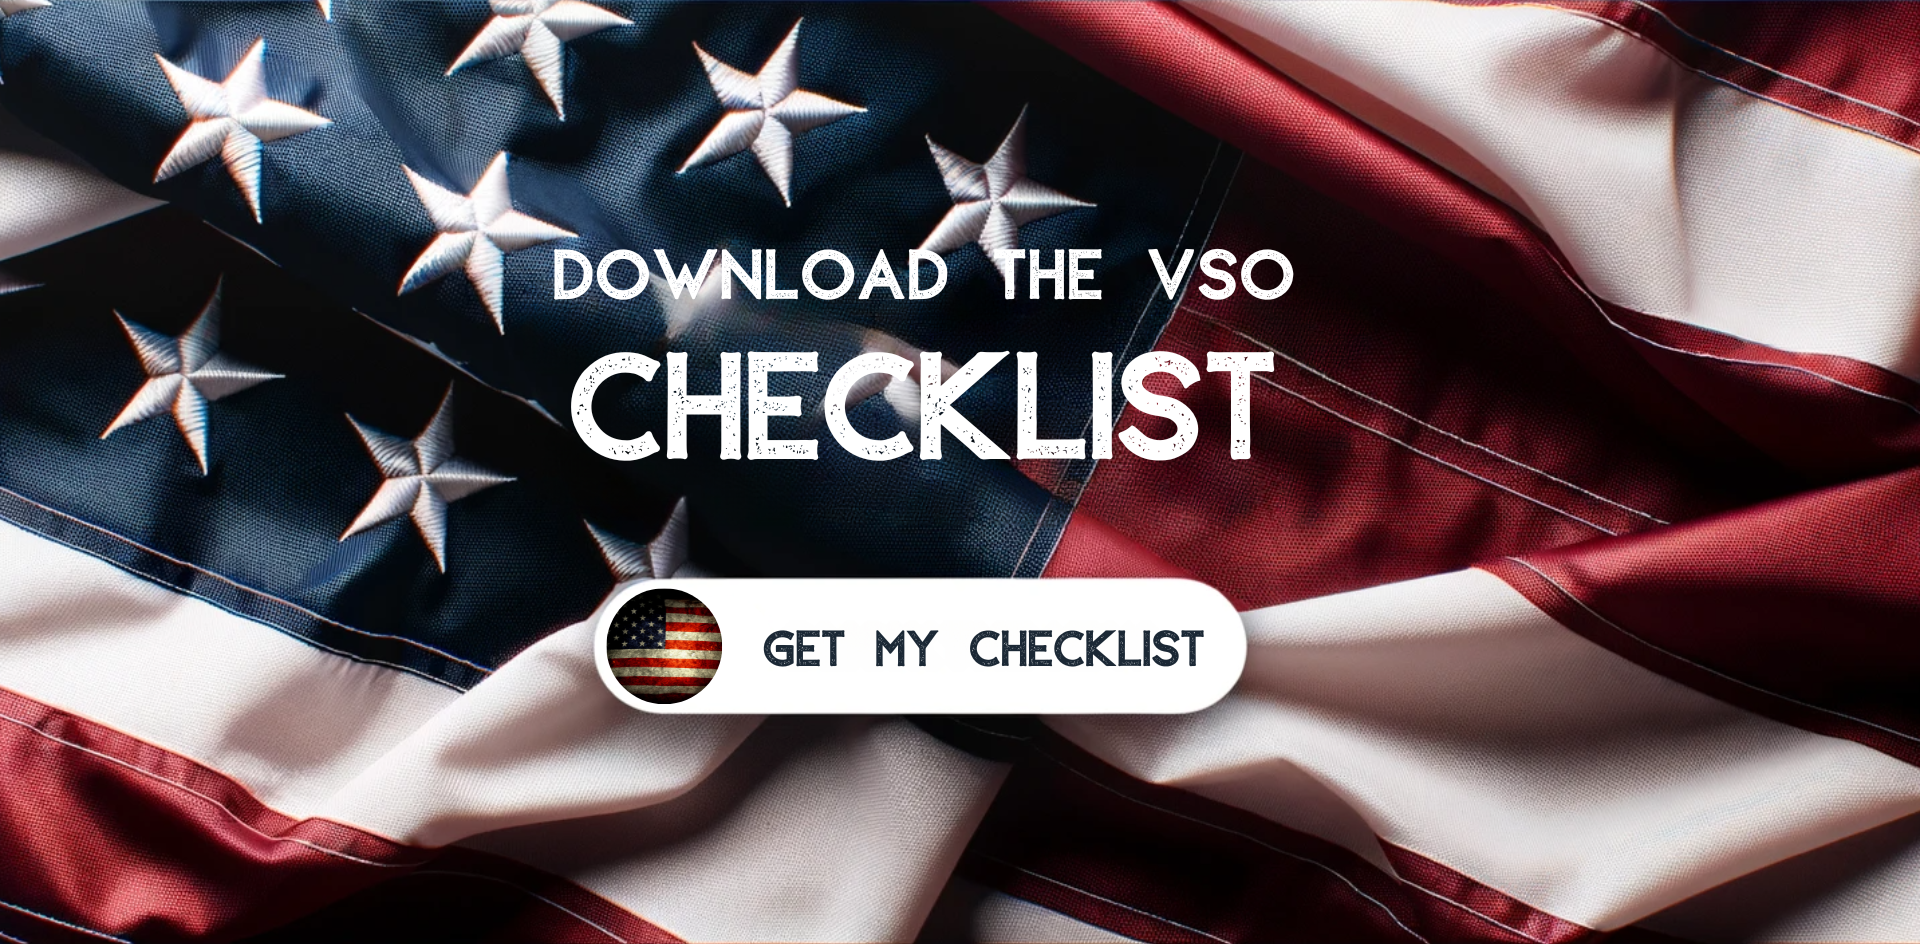 an image of an American flag and a button to download a VSO checklist